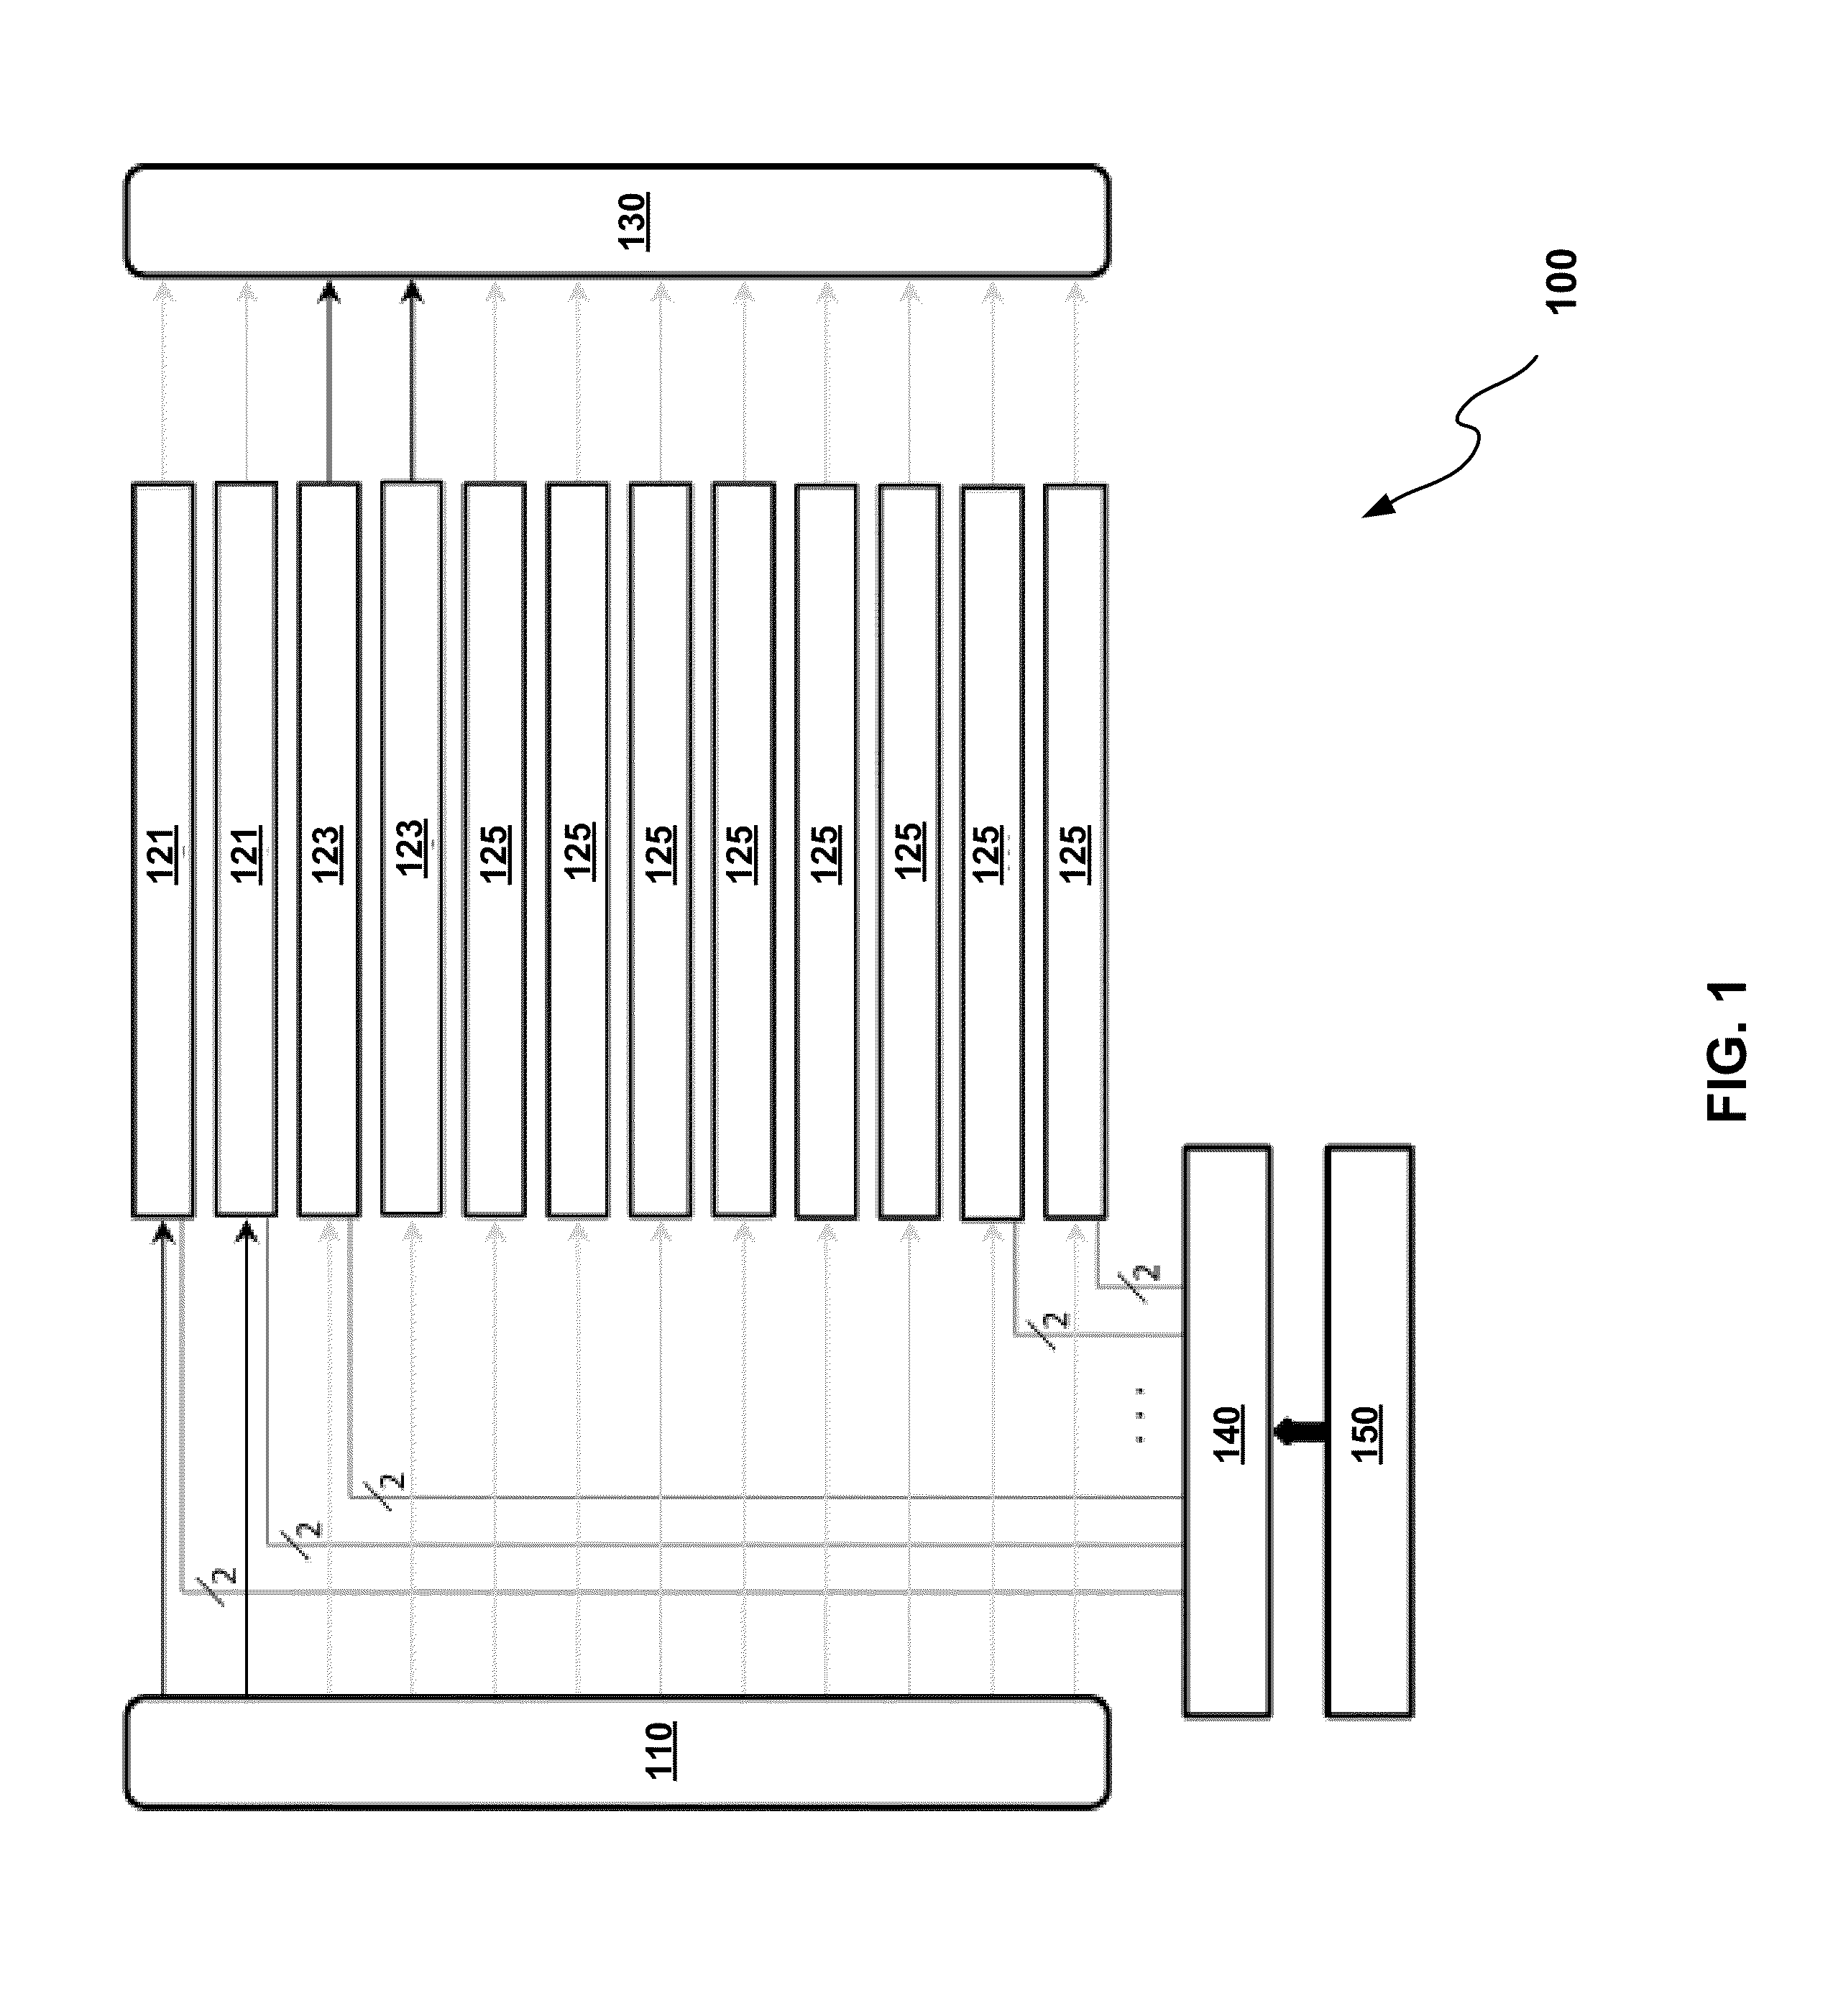 Scan chain configuration for test-per-clock based on circuit topology